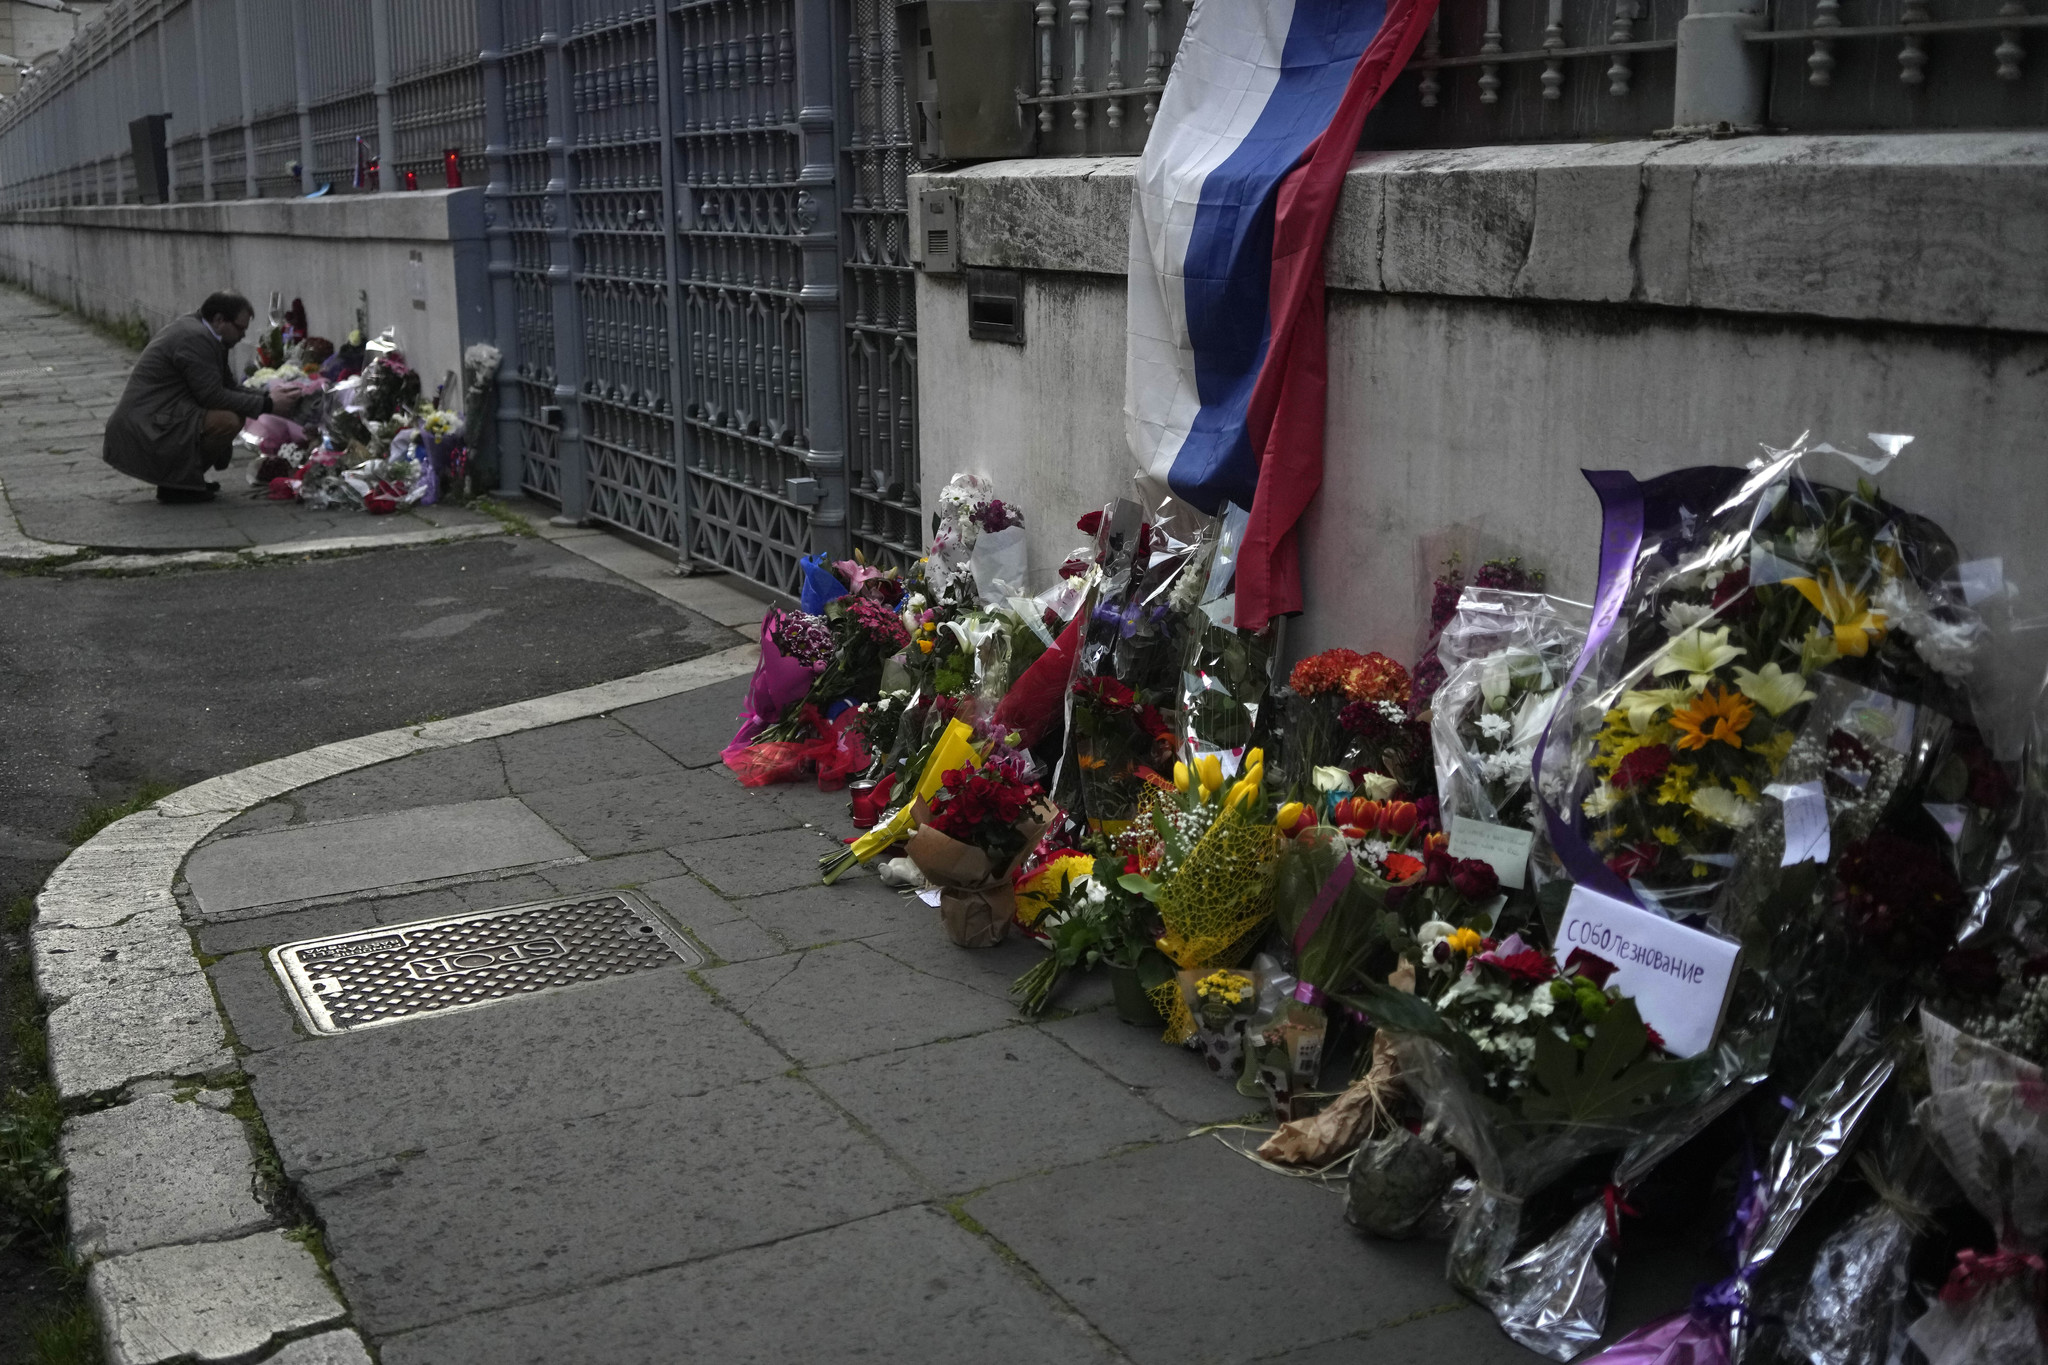 A man looks at flower tributes outside of the Russian embassy in Rome